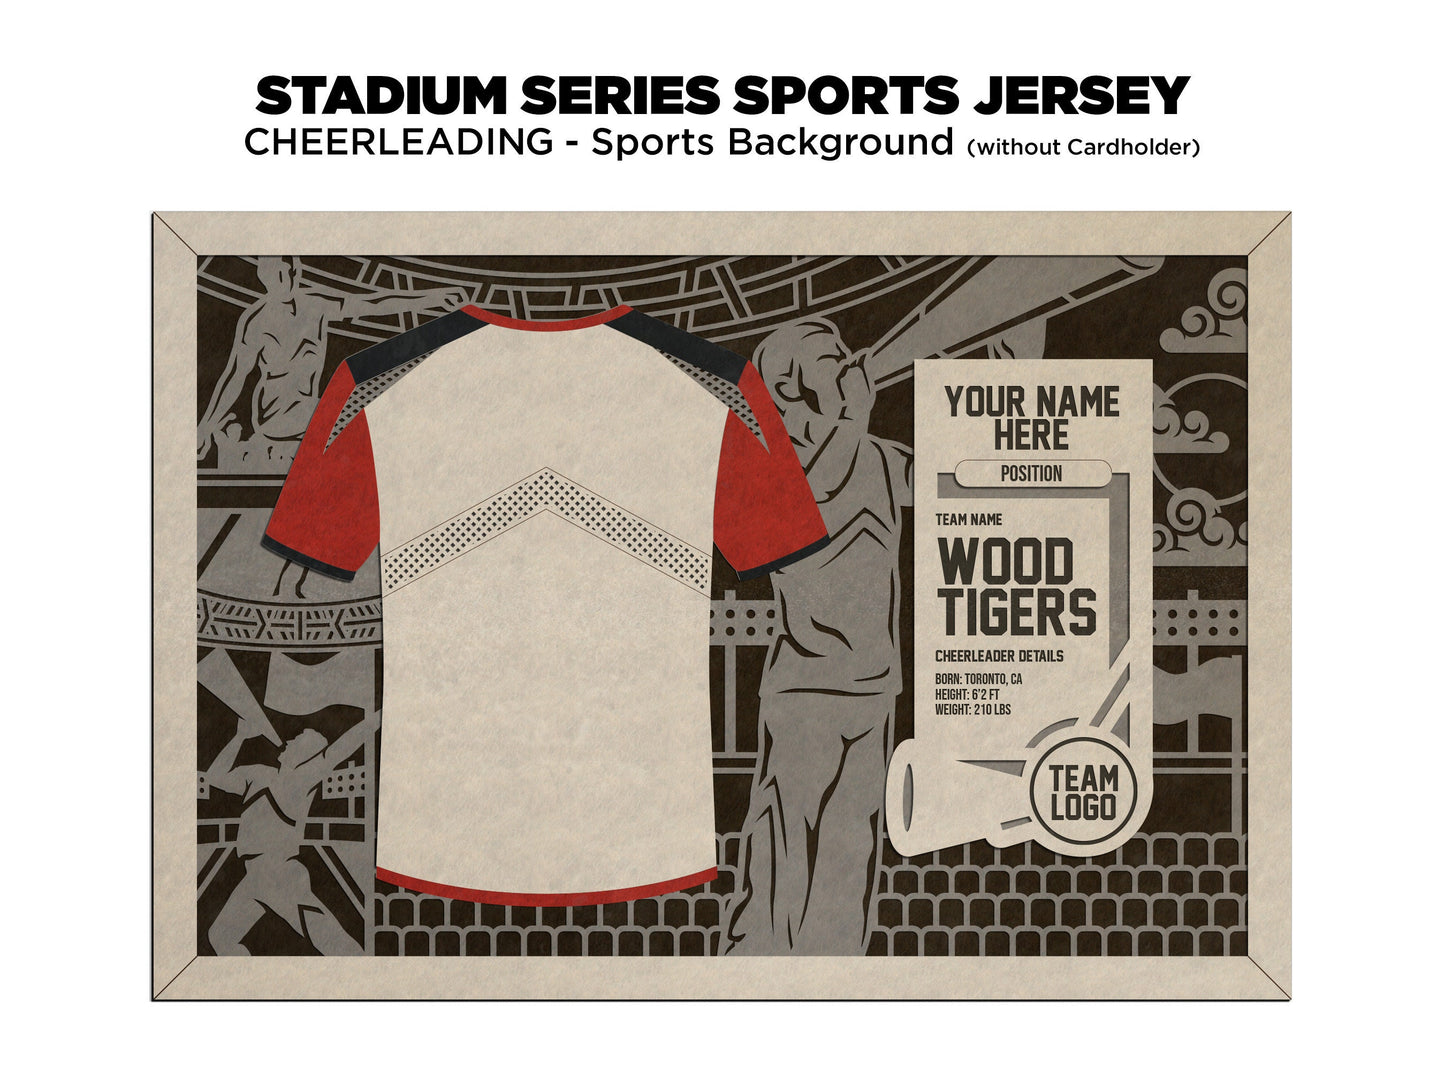 Stadium Series Jerseys - Cheerleading - 3 Variations - Male, Female & Alternate Backgrounds - SVG File Download - Sized for Glowforge